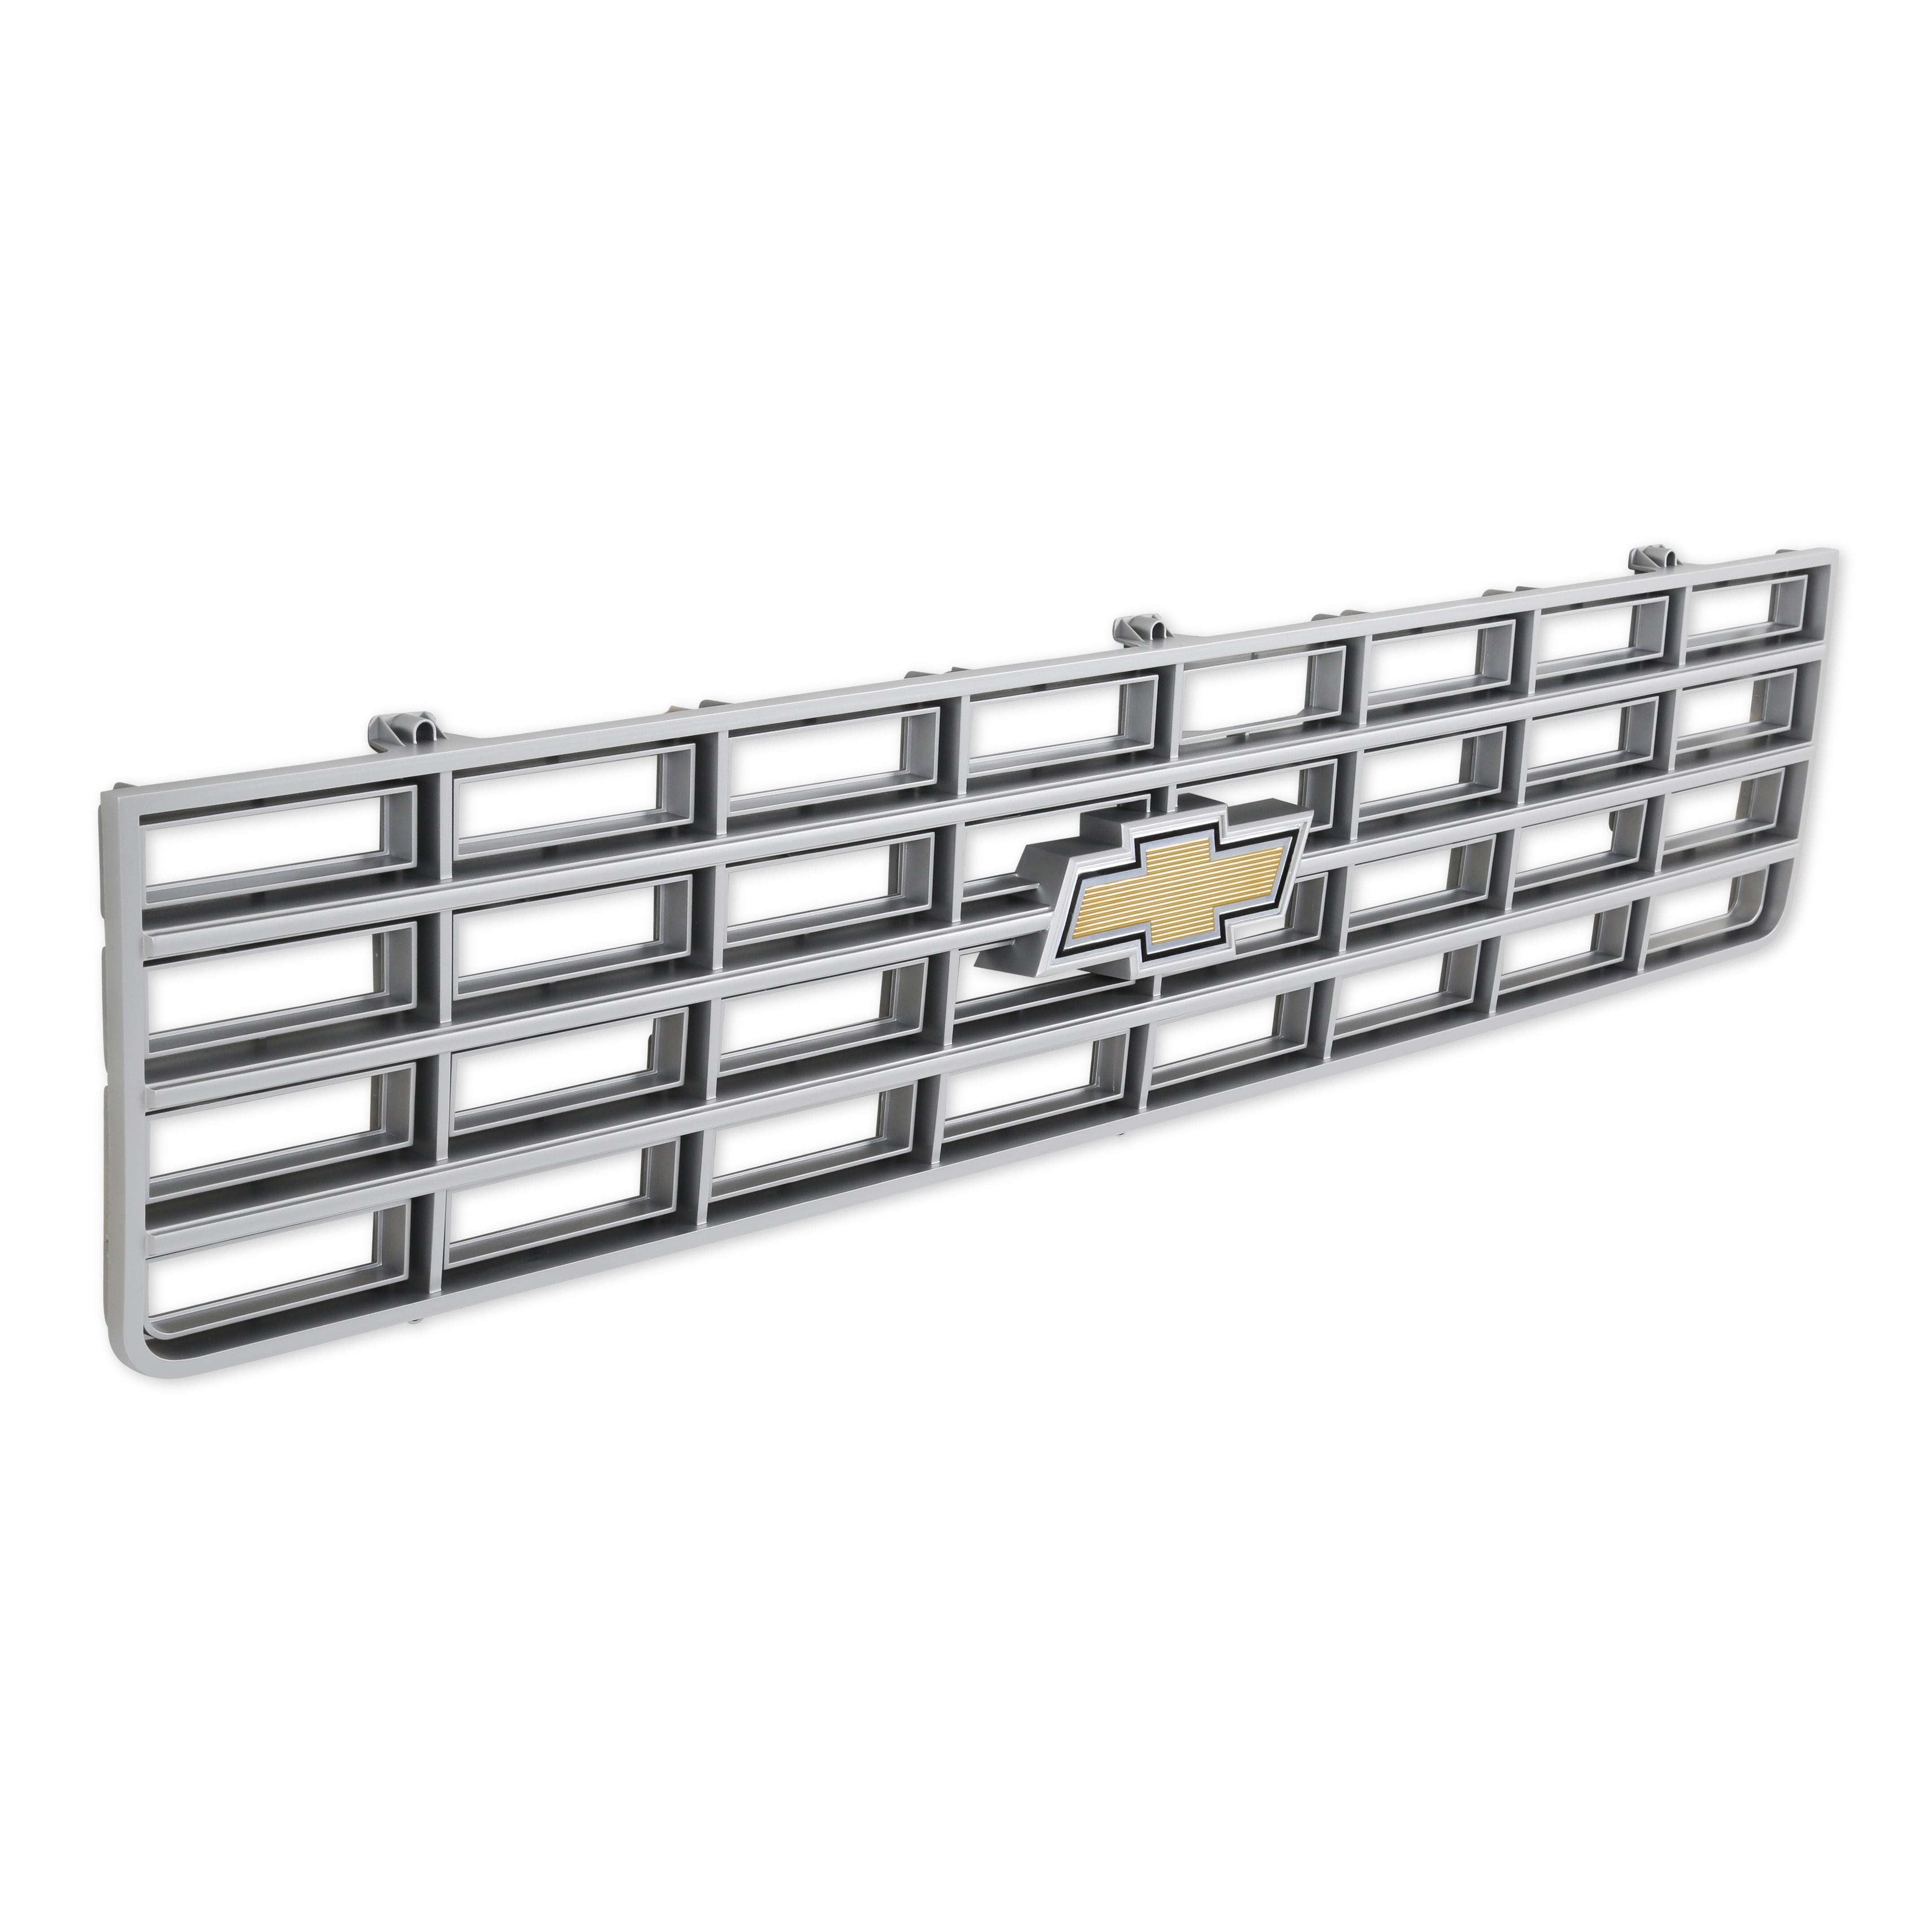 BROTHERS C/K Chevy Grille - w/ Bowtie - Silver pn 04-169